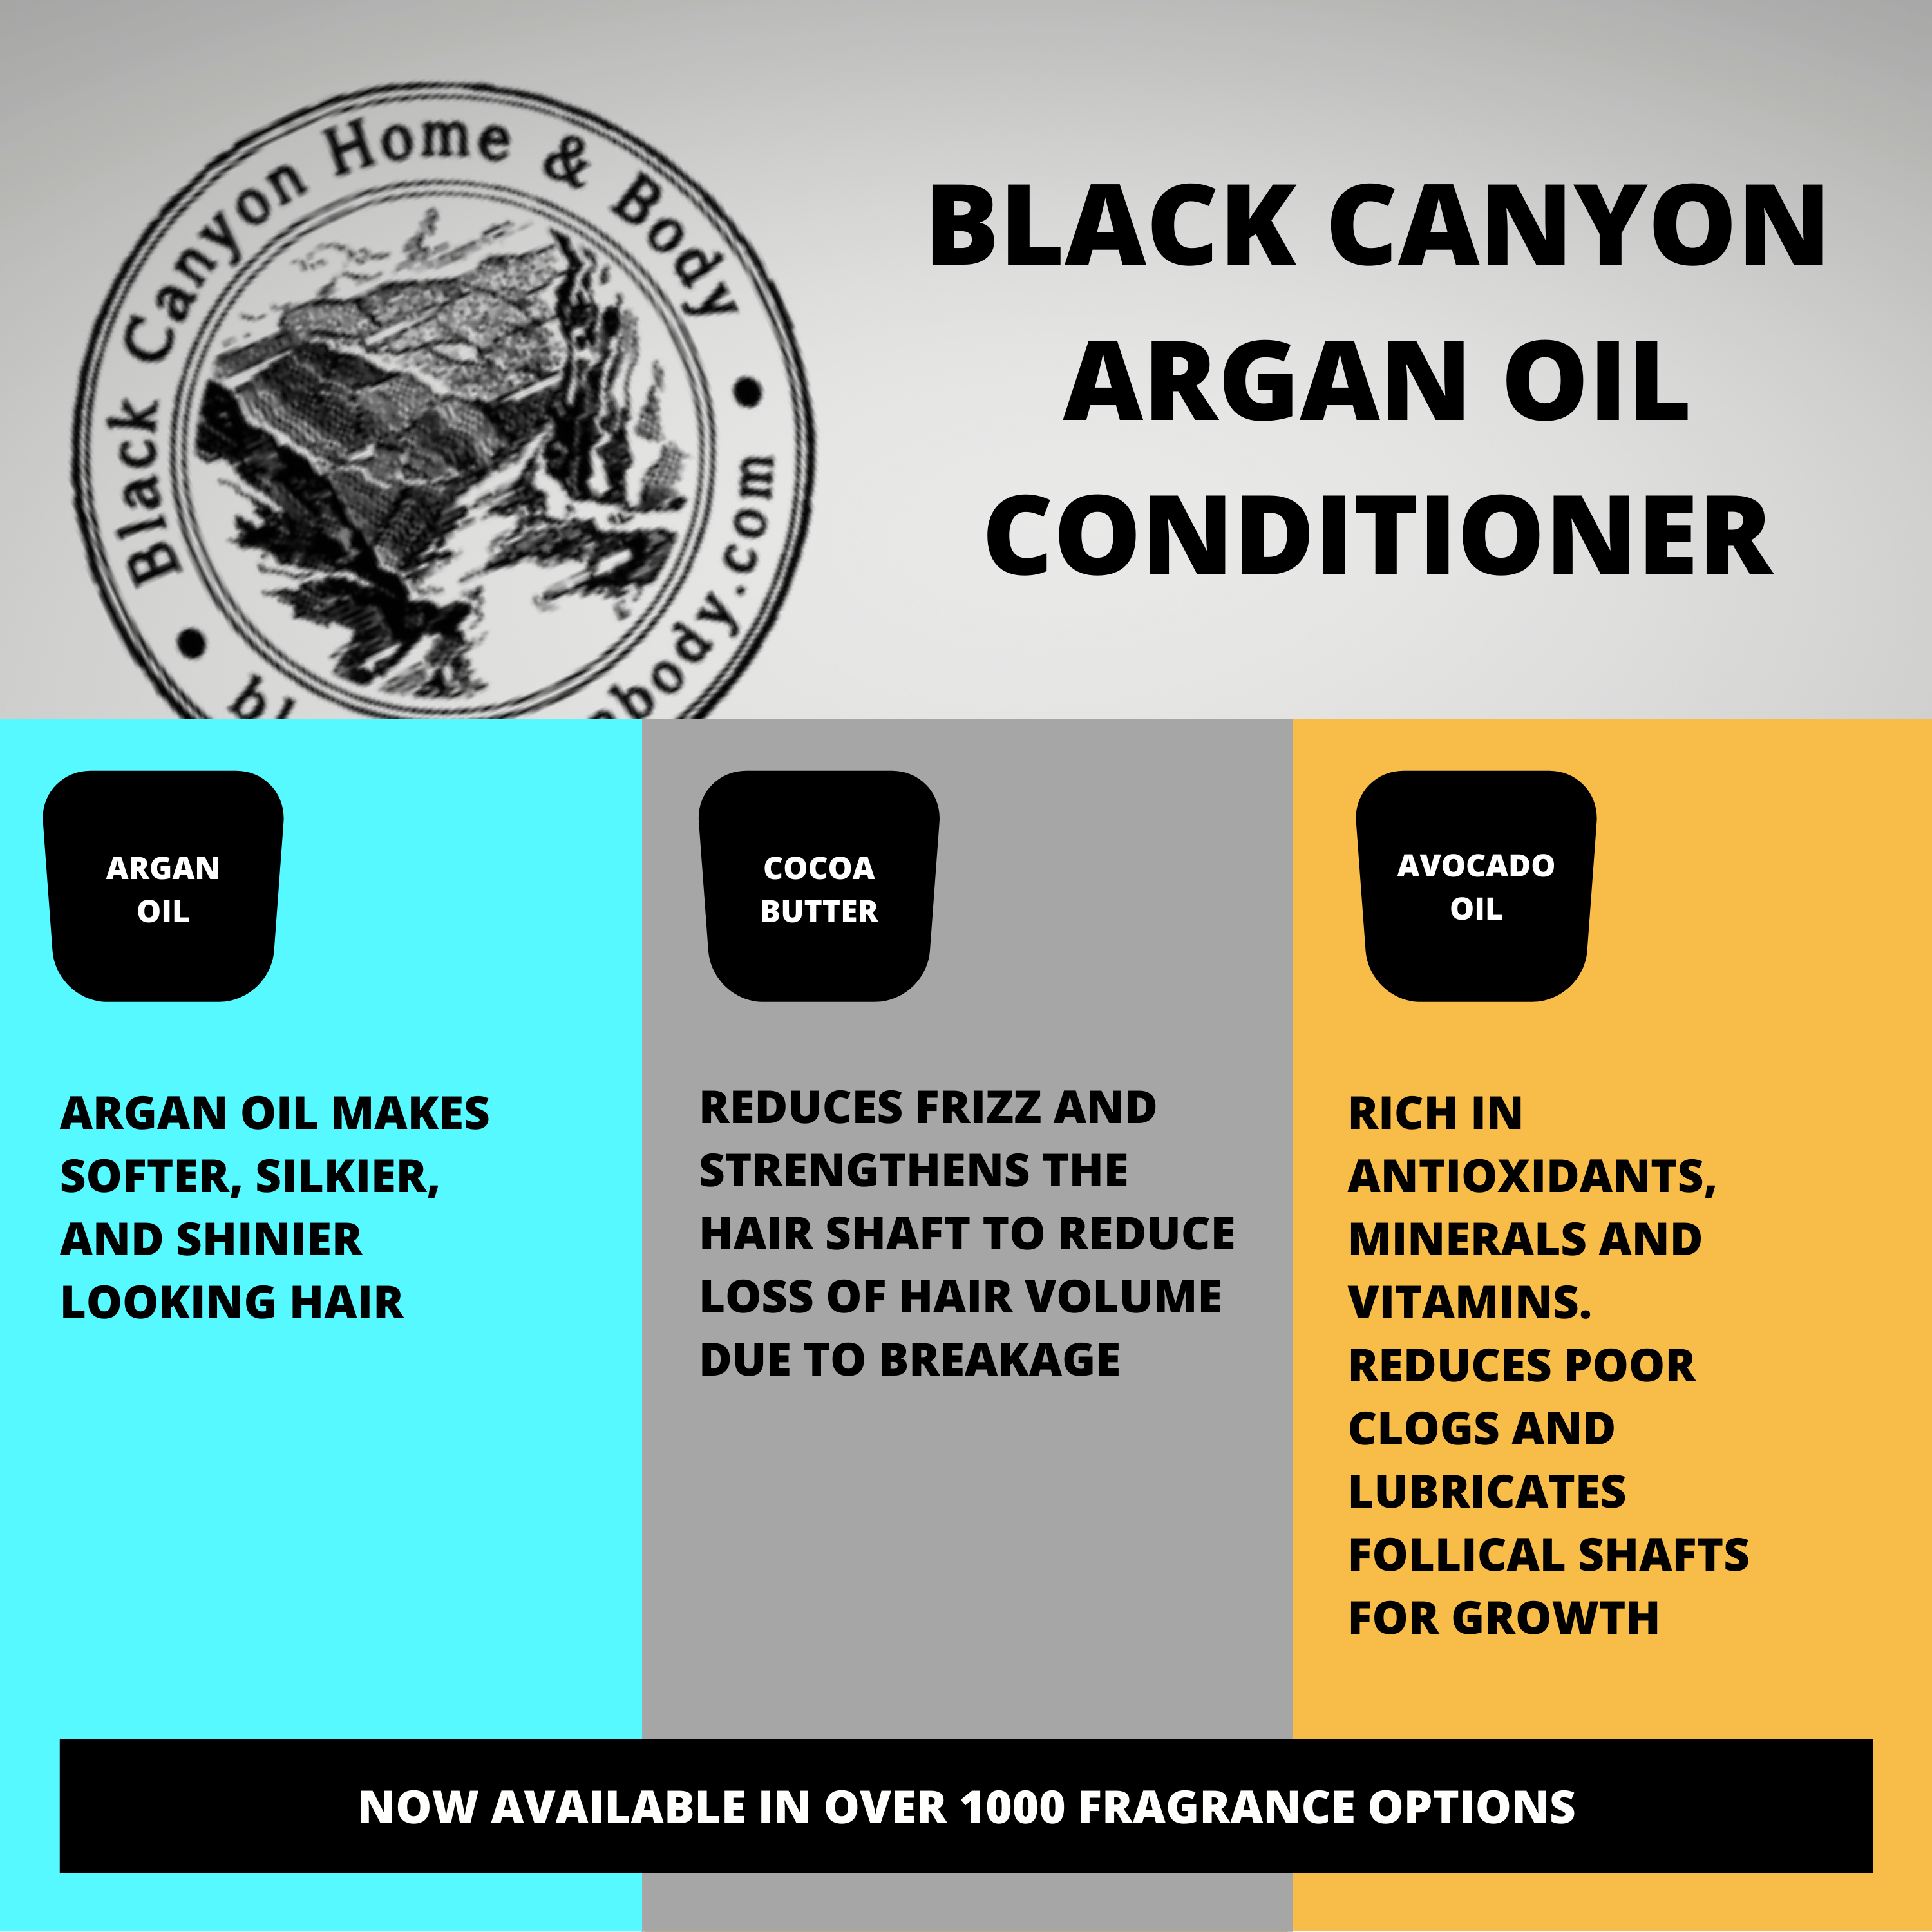 Black Canyon Grapefruit Delight Scented Conditioner with Argan Oil